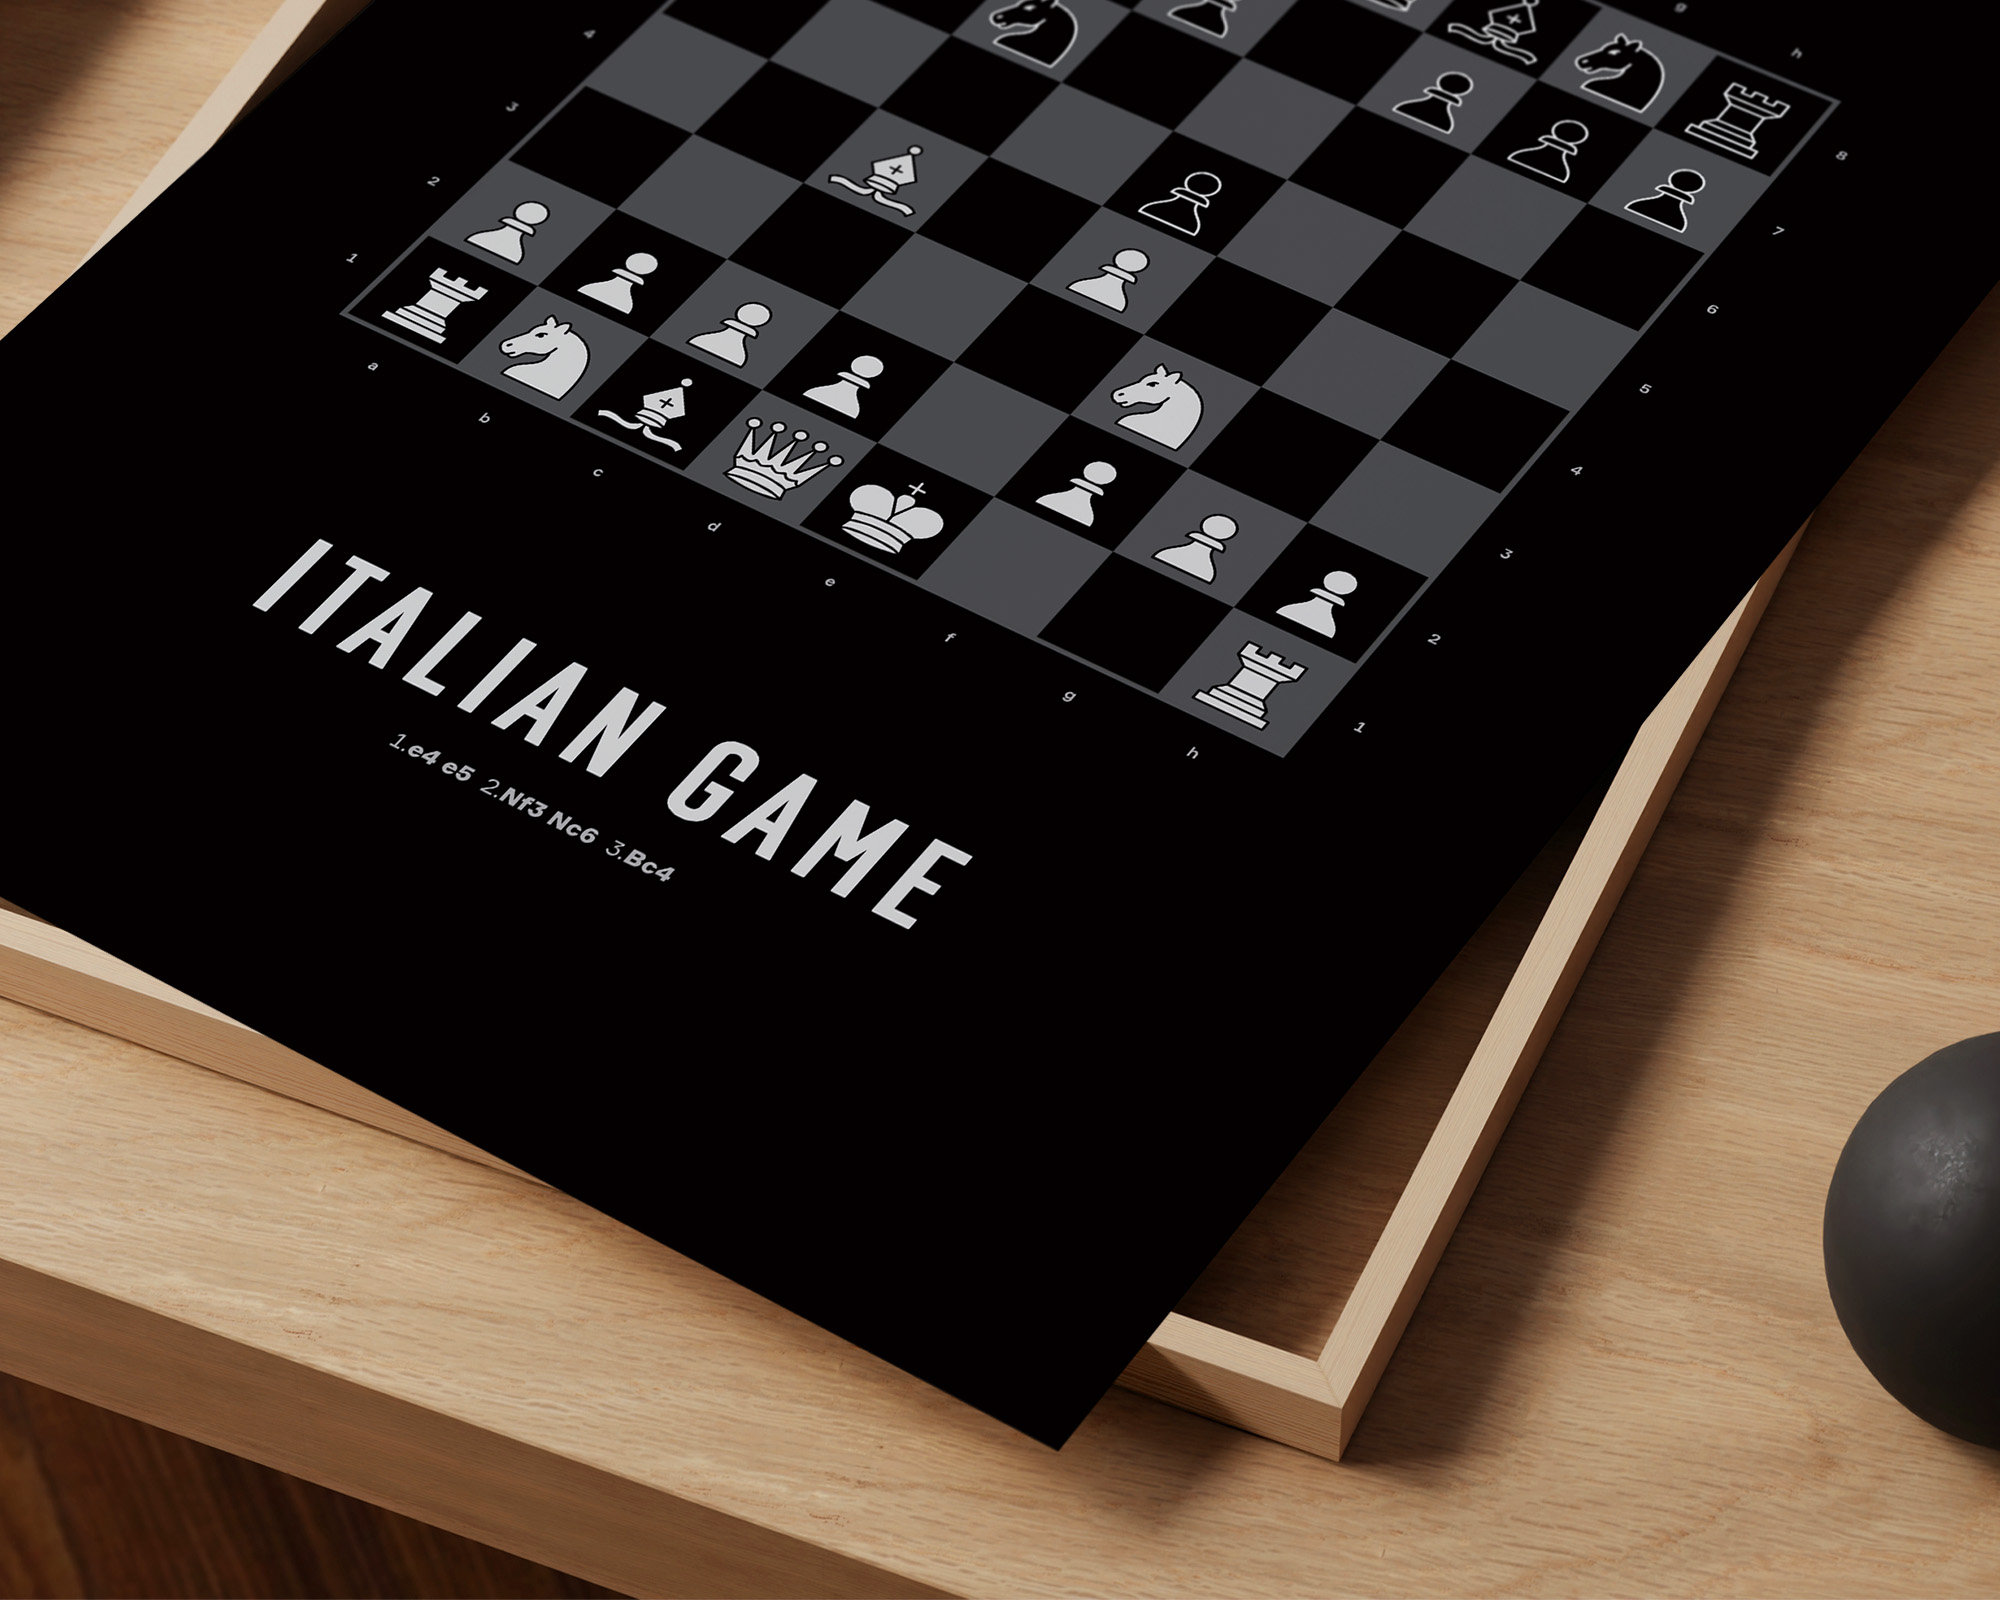 Italian Game Chess Opening Poster black Version Chess -  Finland